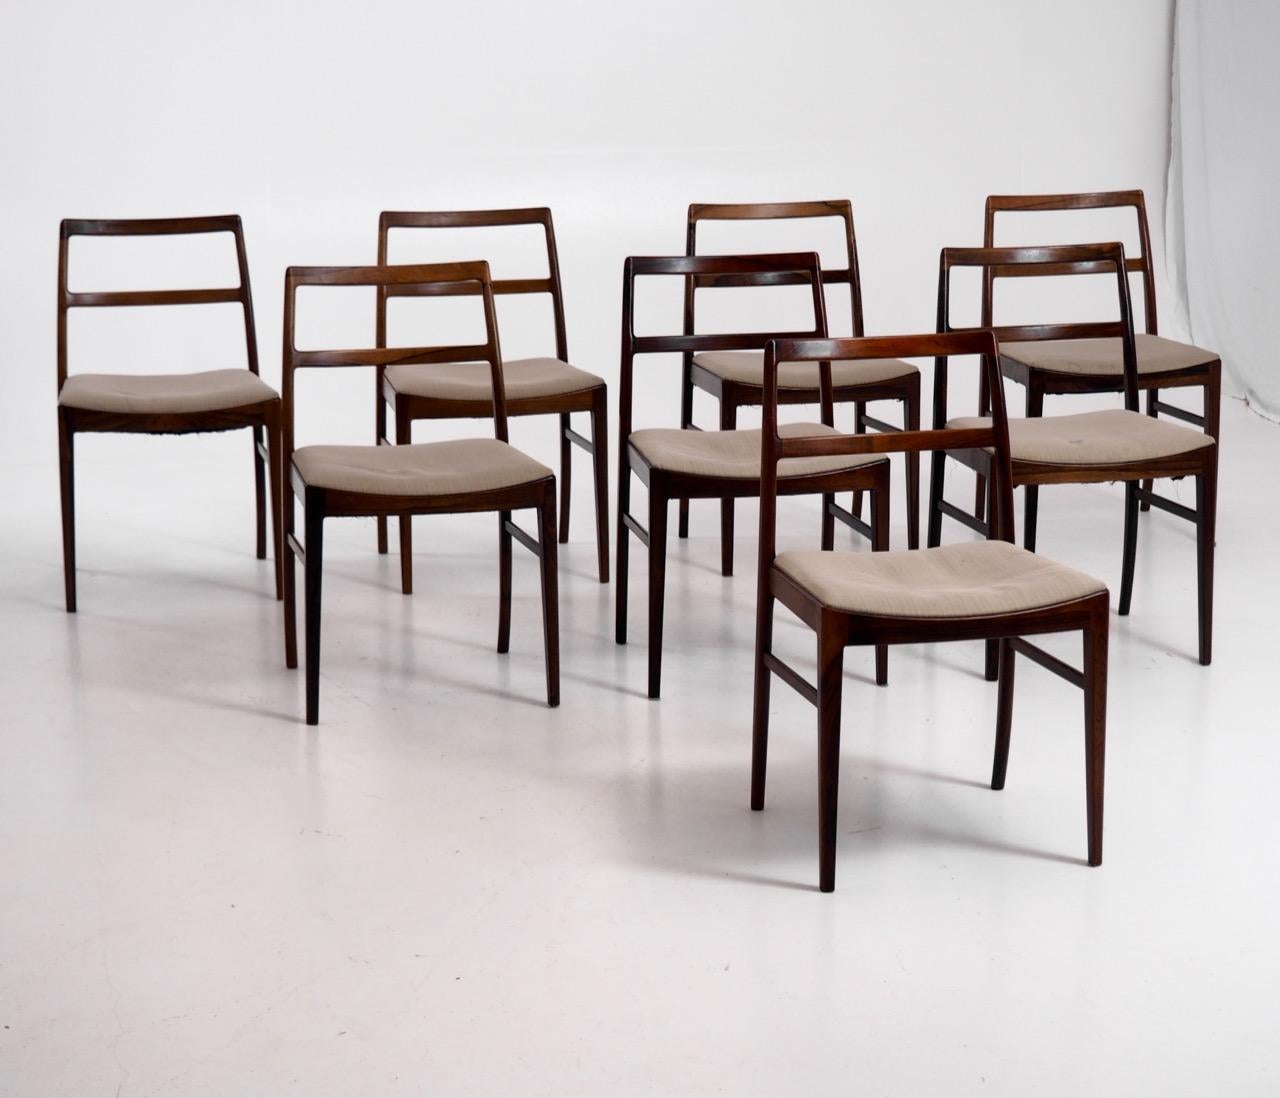 Set of 8 chairs in rosewood by Arne Vodder (1926 - 2009). Arne Vodder was one of the most important Danish designers in the 1960s. Produced at Sibast, Model 430.
 